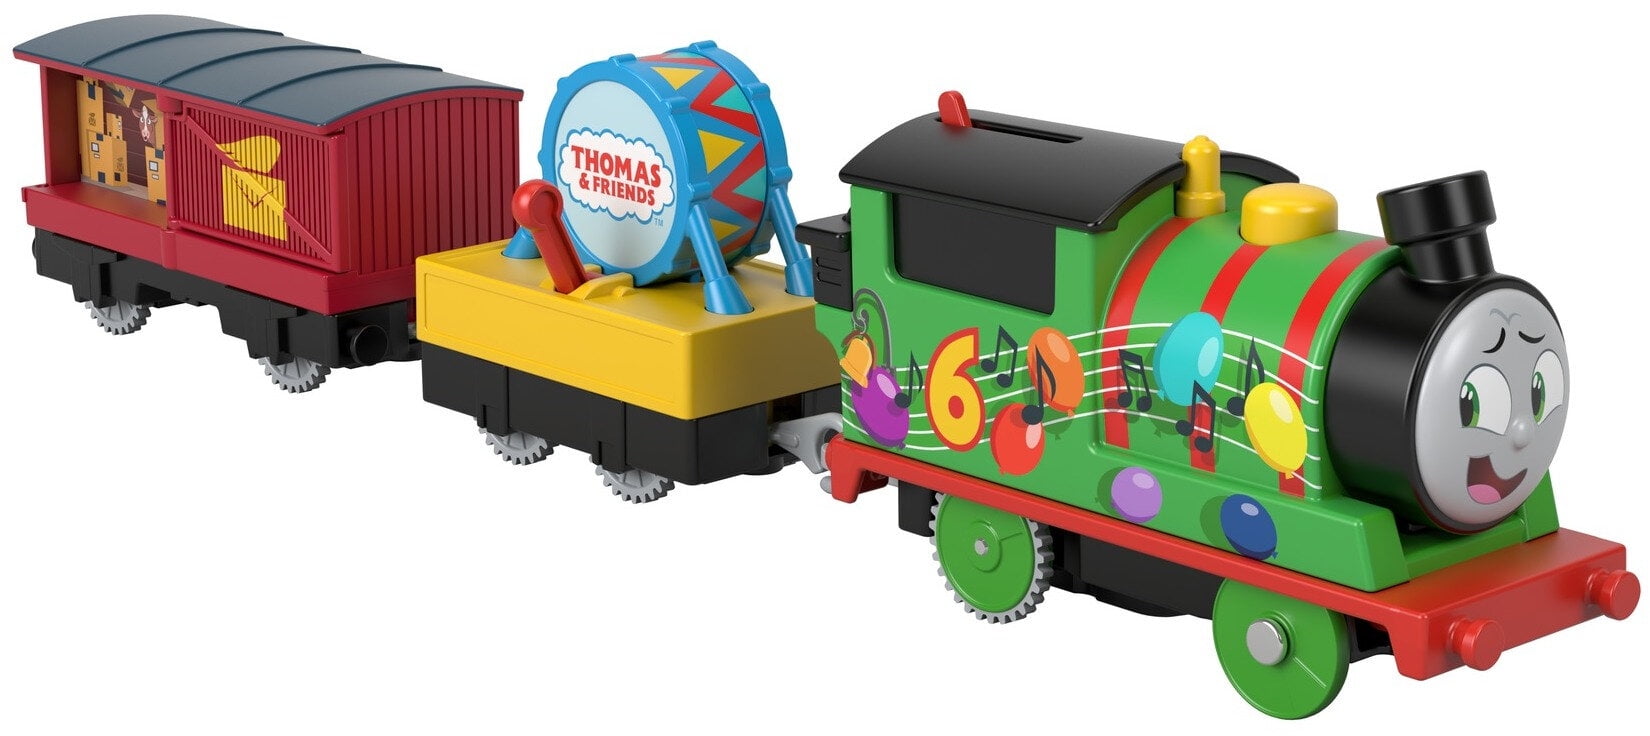 Fisher and price Thomas the train Percy collectibles railway train set 